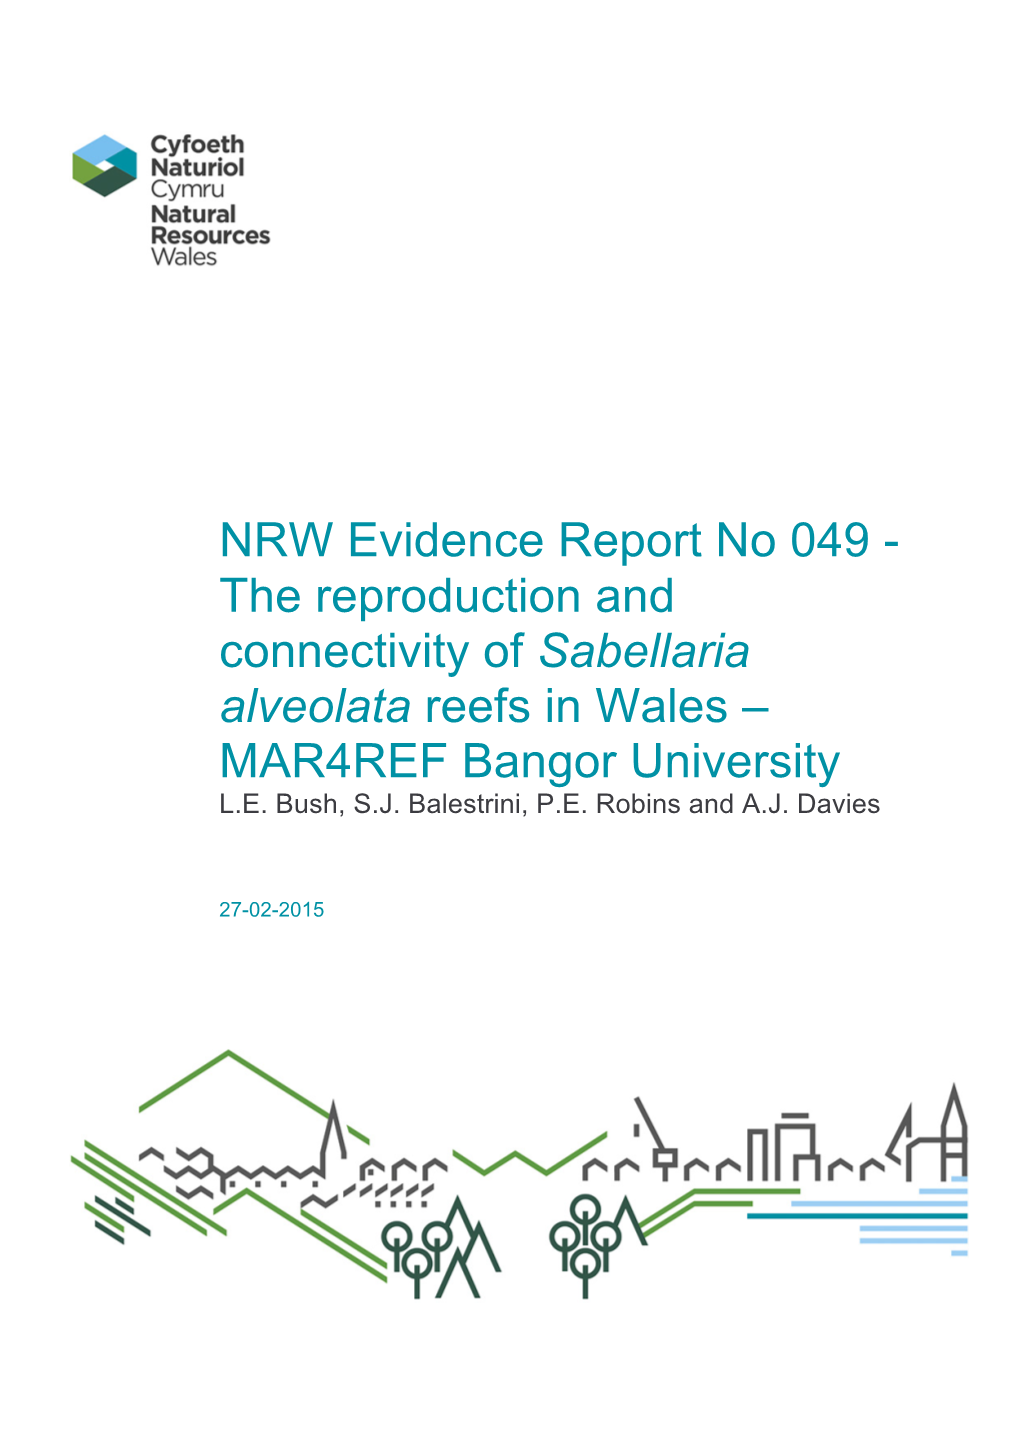 NRW Evidence Report No 049 - the Reproduction and Connectivity of Sabellaria Alveolata Reefs in Wales – MAR4REF Bangor University L.E